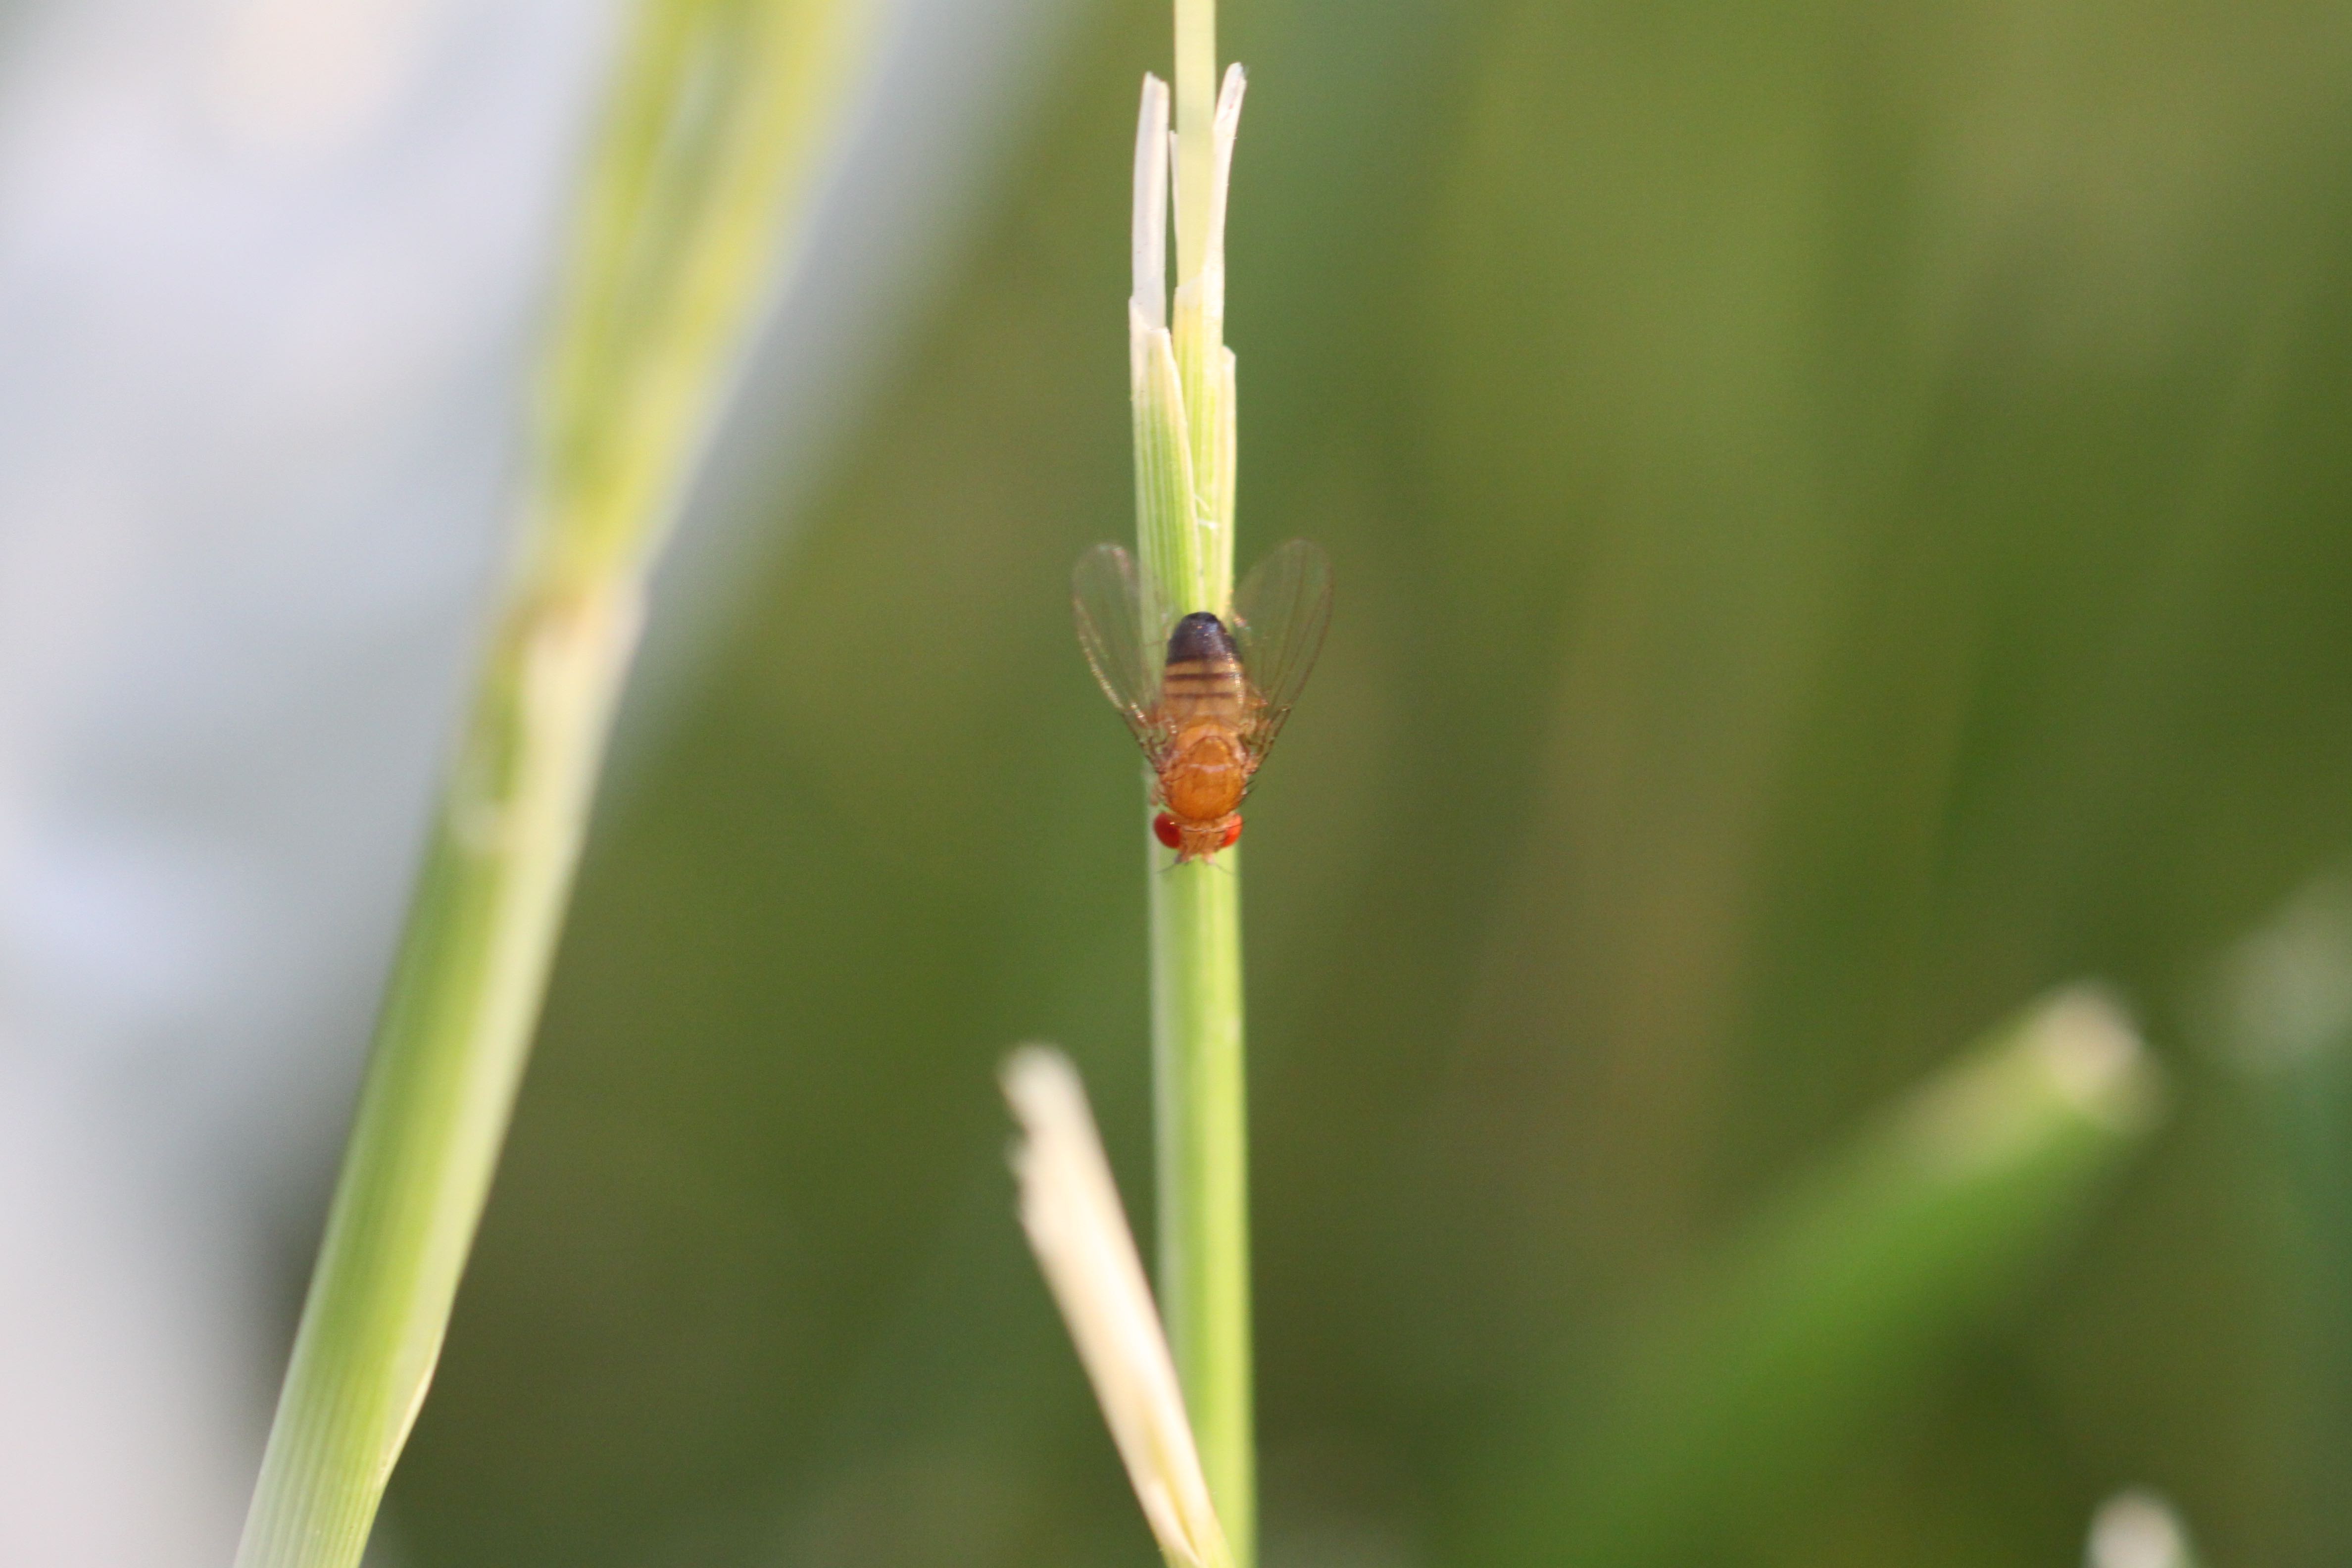 Fruit fly perched on a plant stem